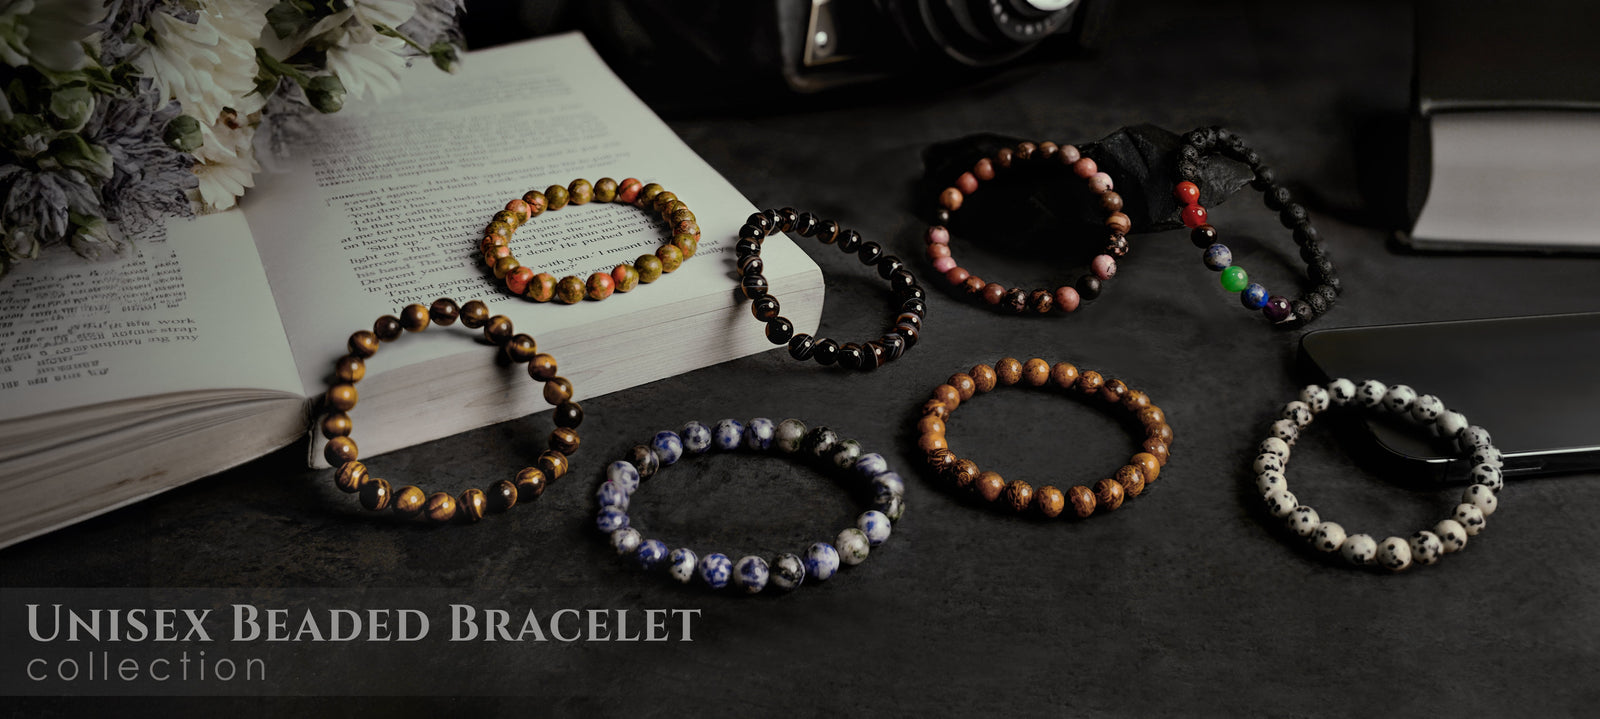 Beaded bracelets collection featuring handcrafted, vibrant, and elegant designs for versatility.